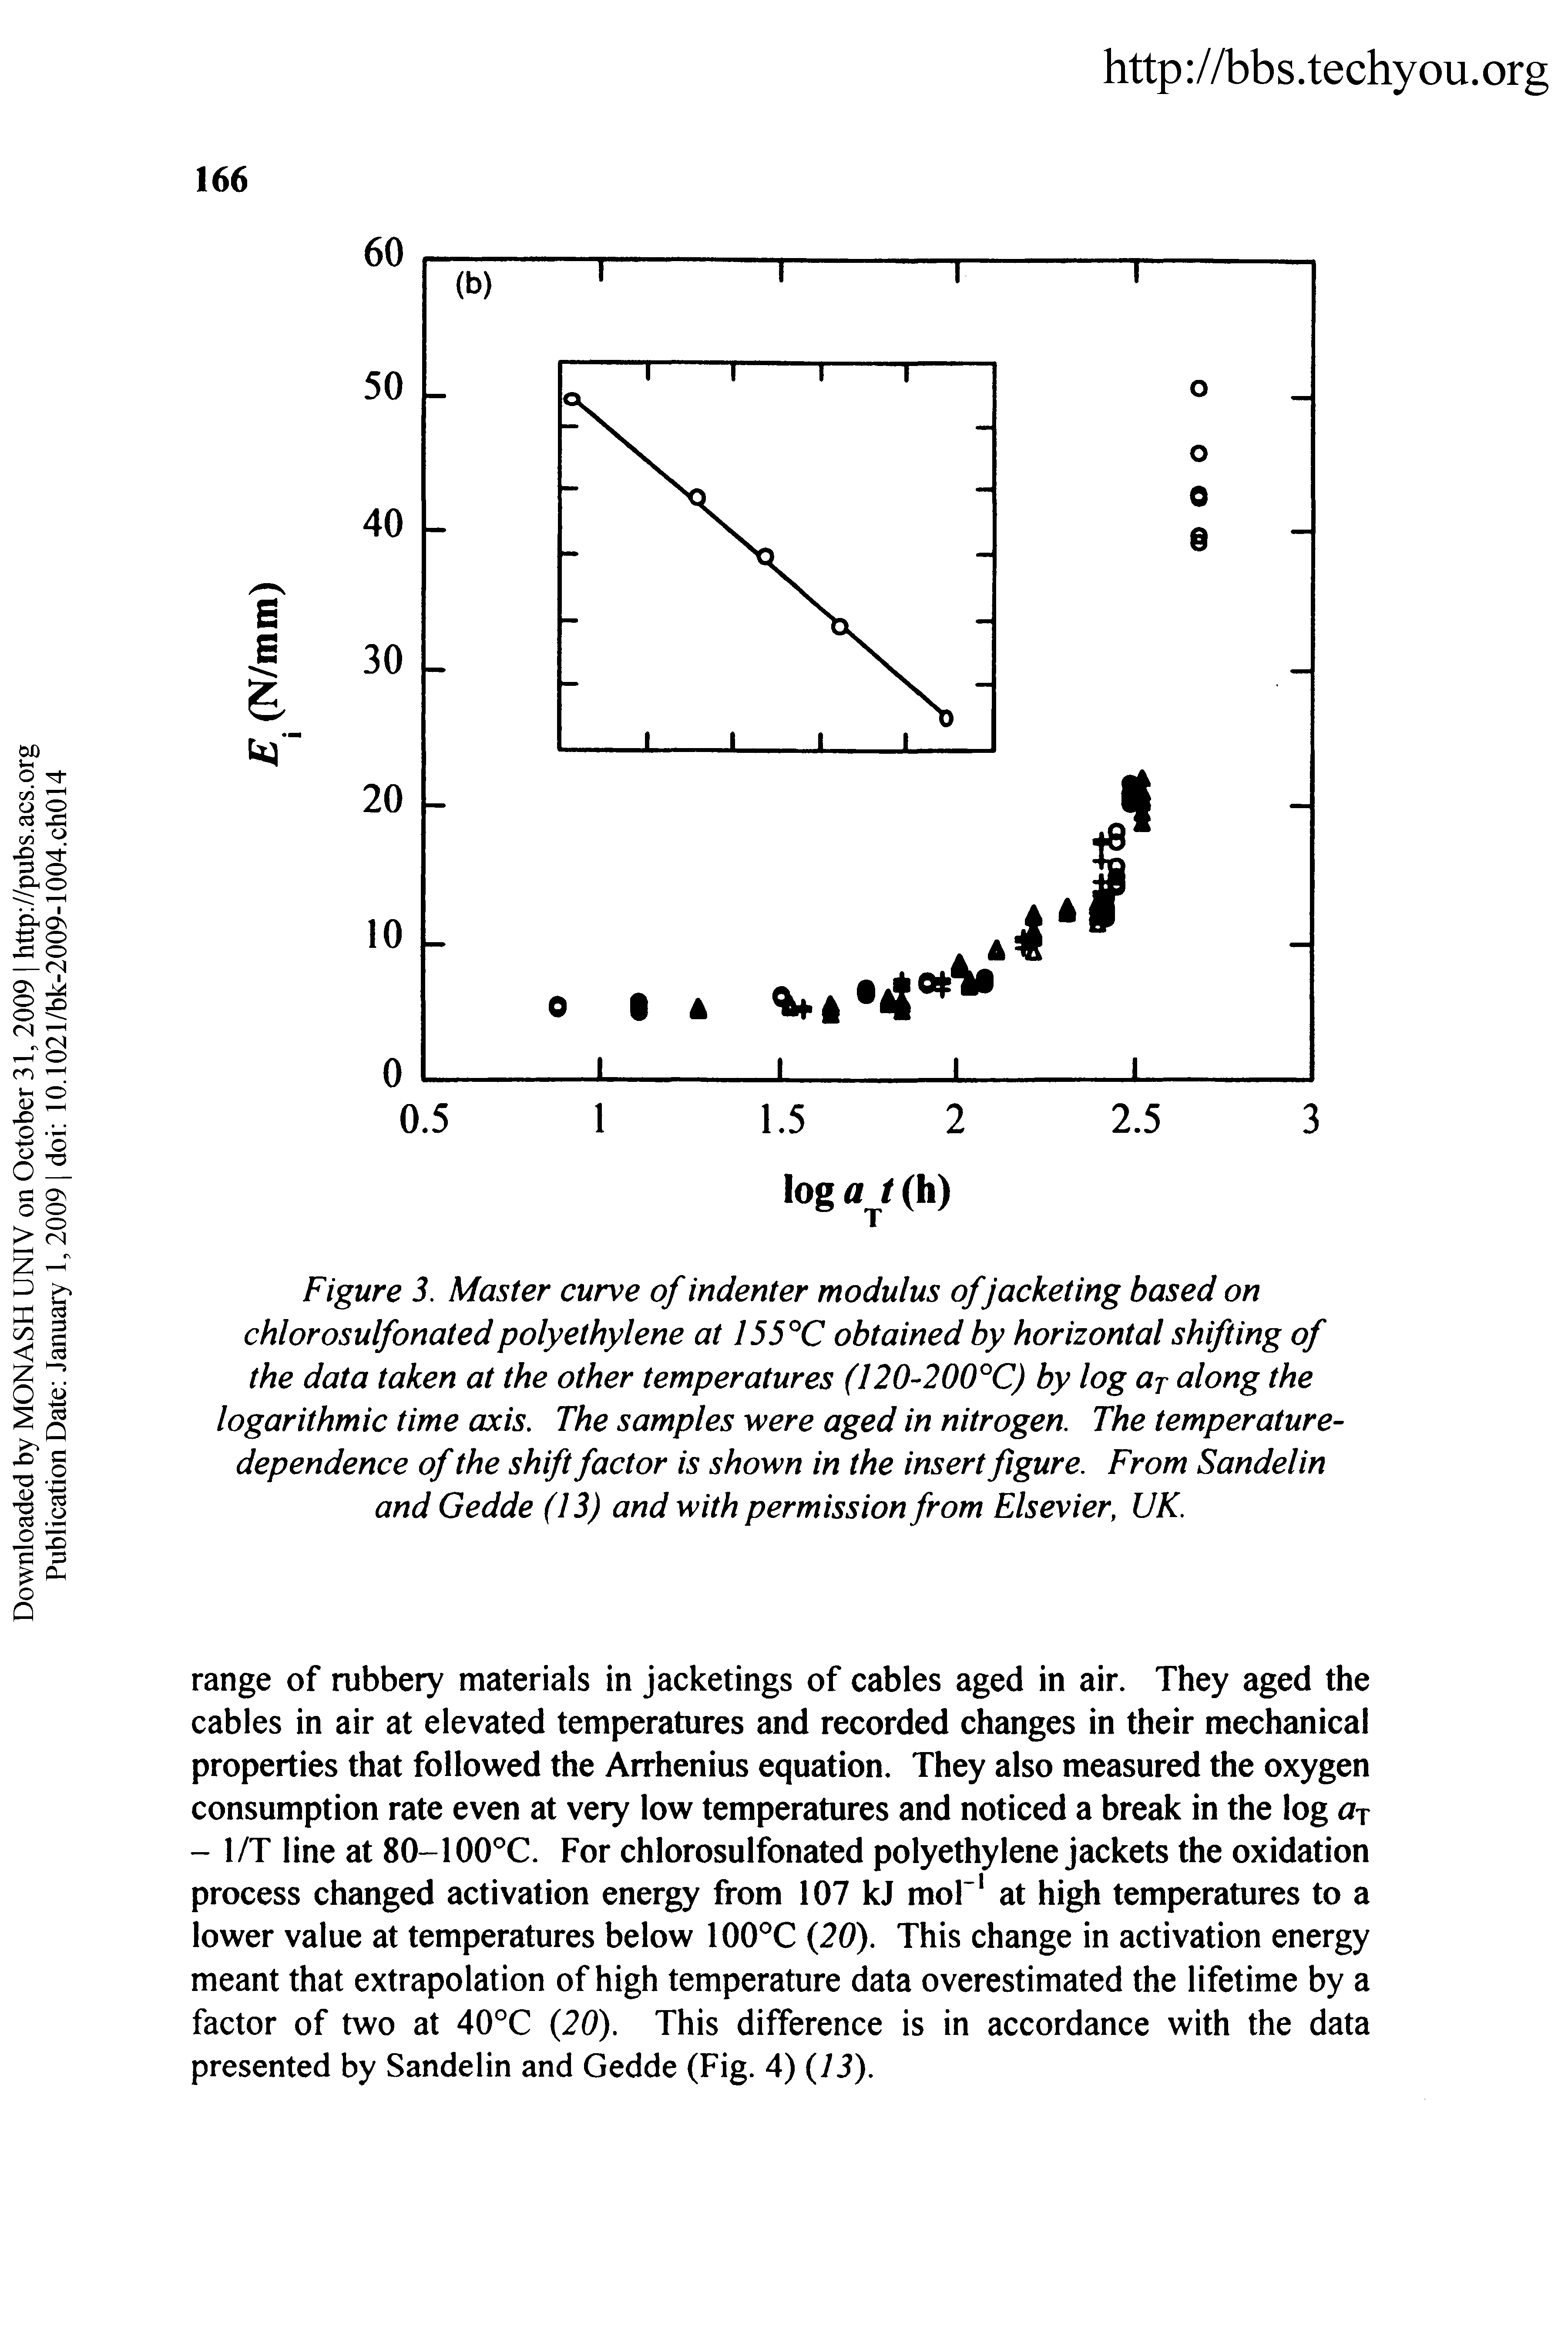 Figure 3. Master curve of indenter modulus of jacketing based on chlorosulfonatedpolyethylene at 155°C obtained by horizontal shifting of the data taken at the other temperatures (120-200°C) by log ar along the logarithmic time axis. The samples were aged in nitrogen. The temperature-dependence of the shift factor is shown in the insert figure. From Sandelin and Gedde (13) and with permission from Elsevier, UK.